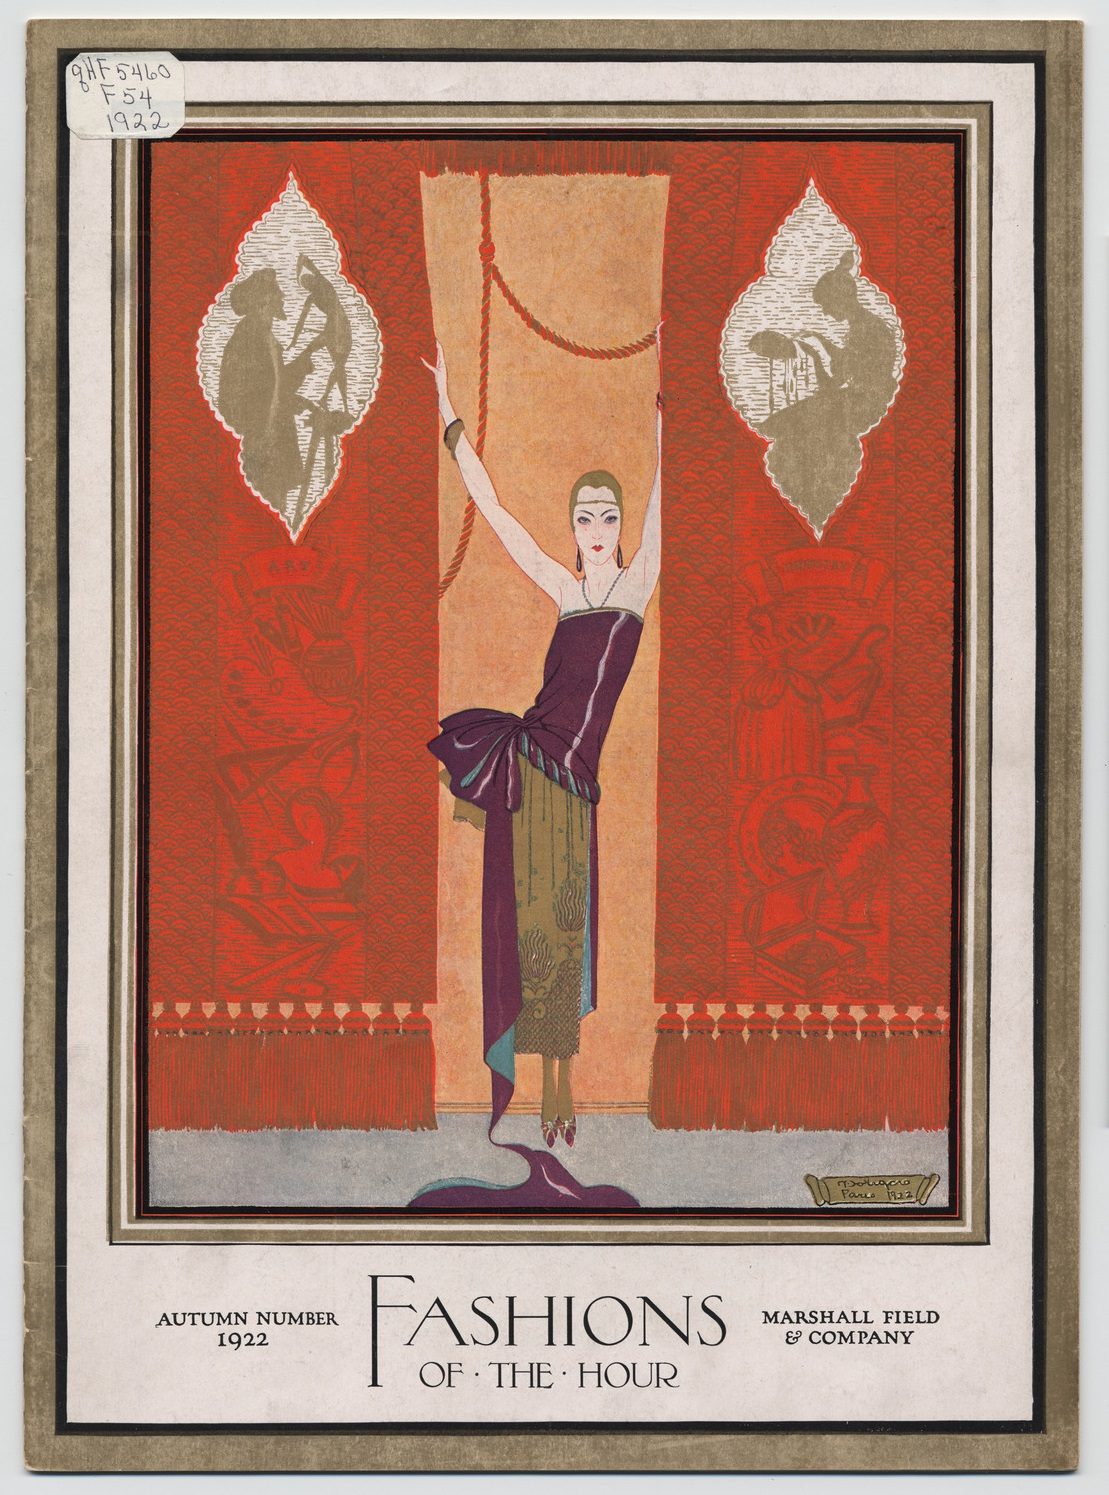 Fashions of the Hour magazine, Exposition Number 1922. Published by Marshall Field & Co.